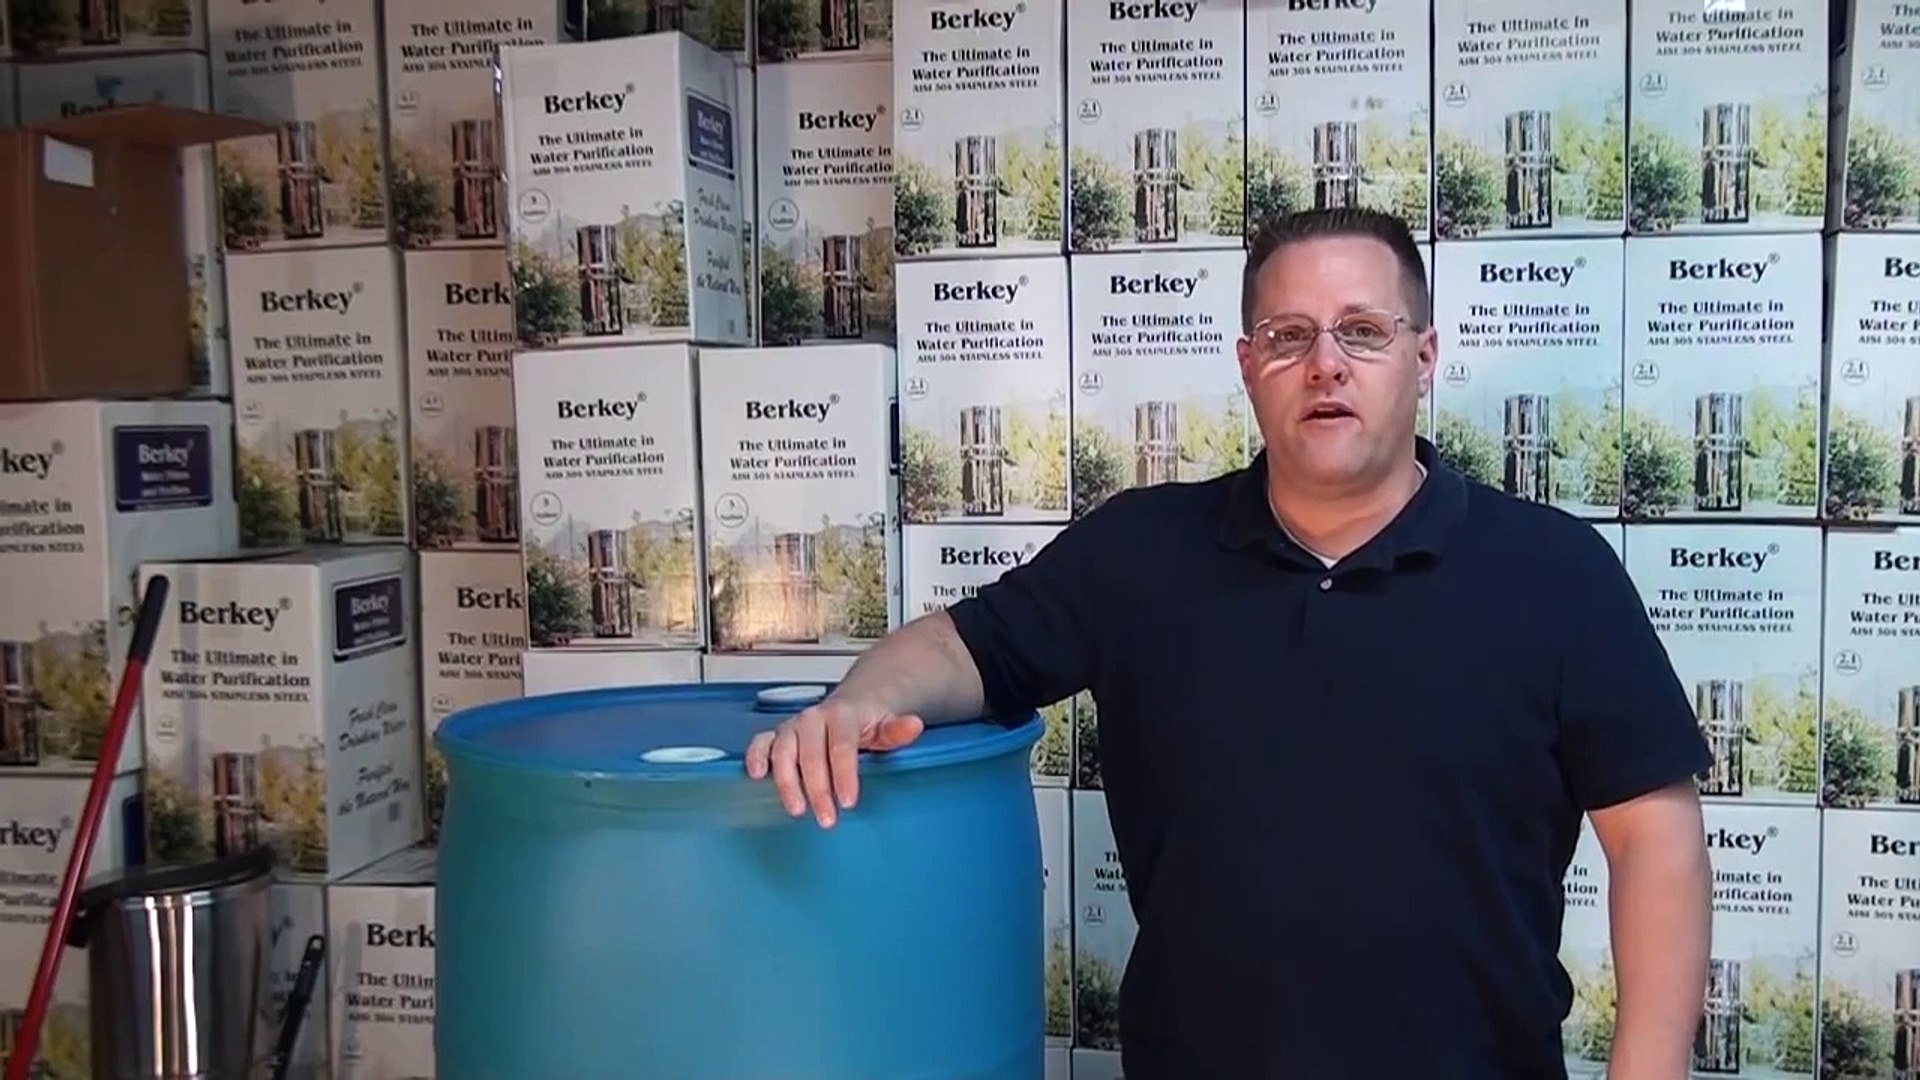 55 Gallon Water Barrel for Water Storage - How to Store Water